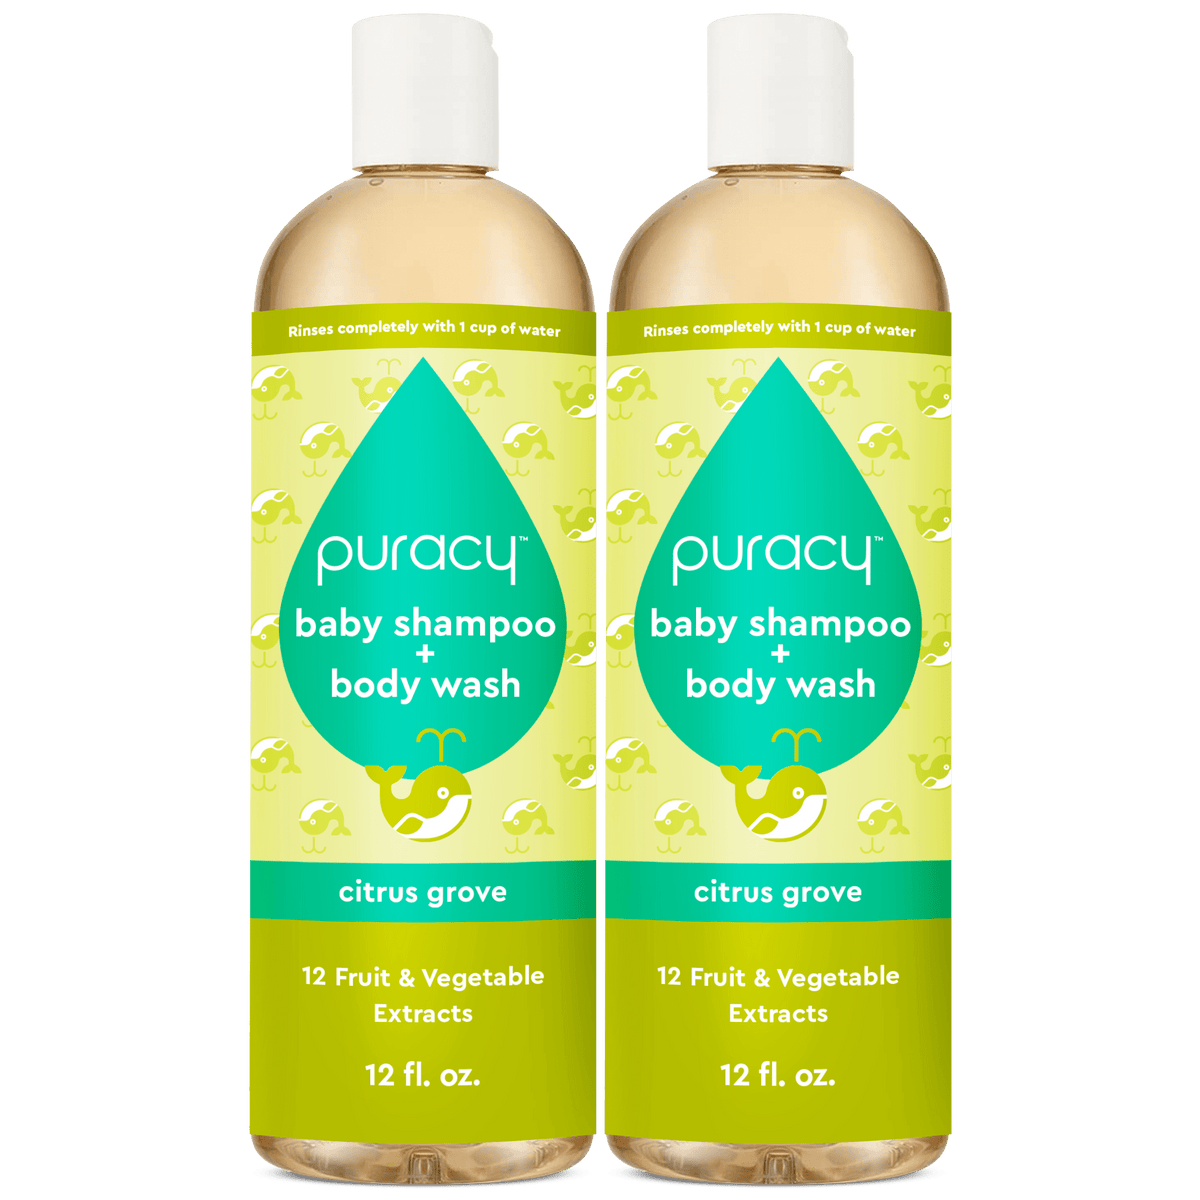  Puracy Multi-Surface Cleaner Concentrate, Makes 1